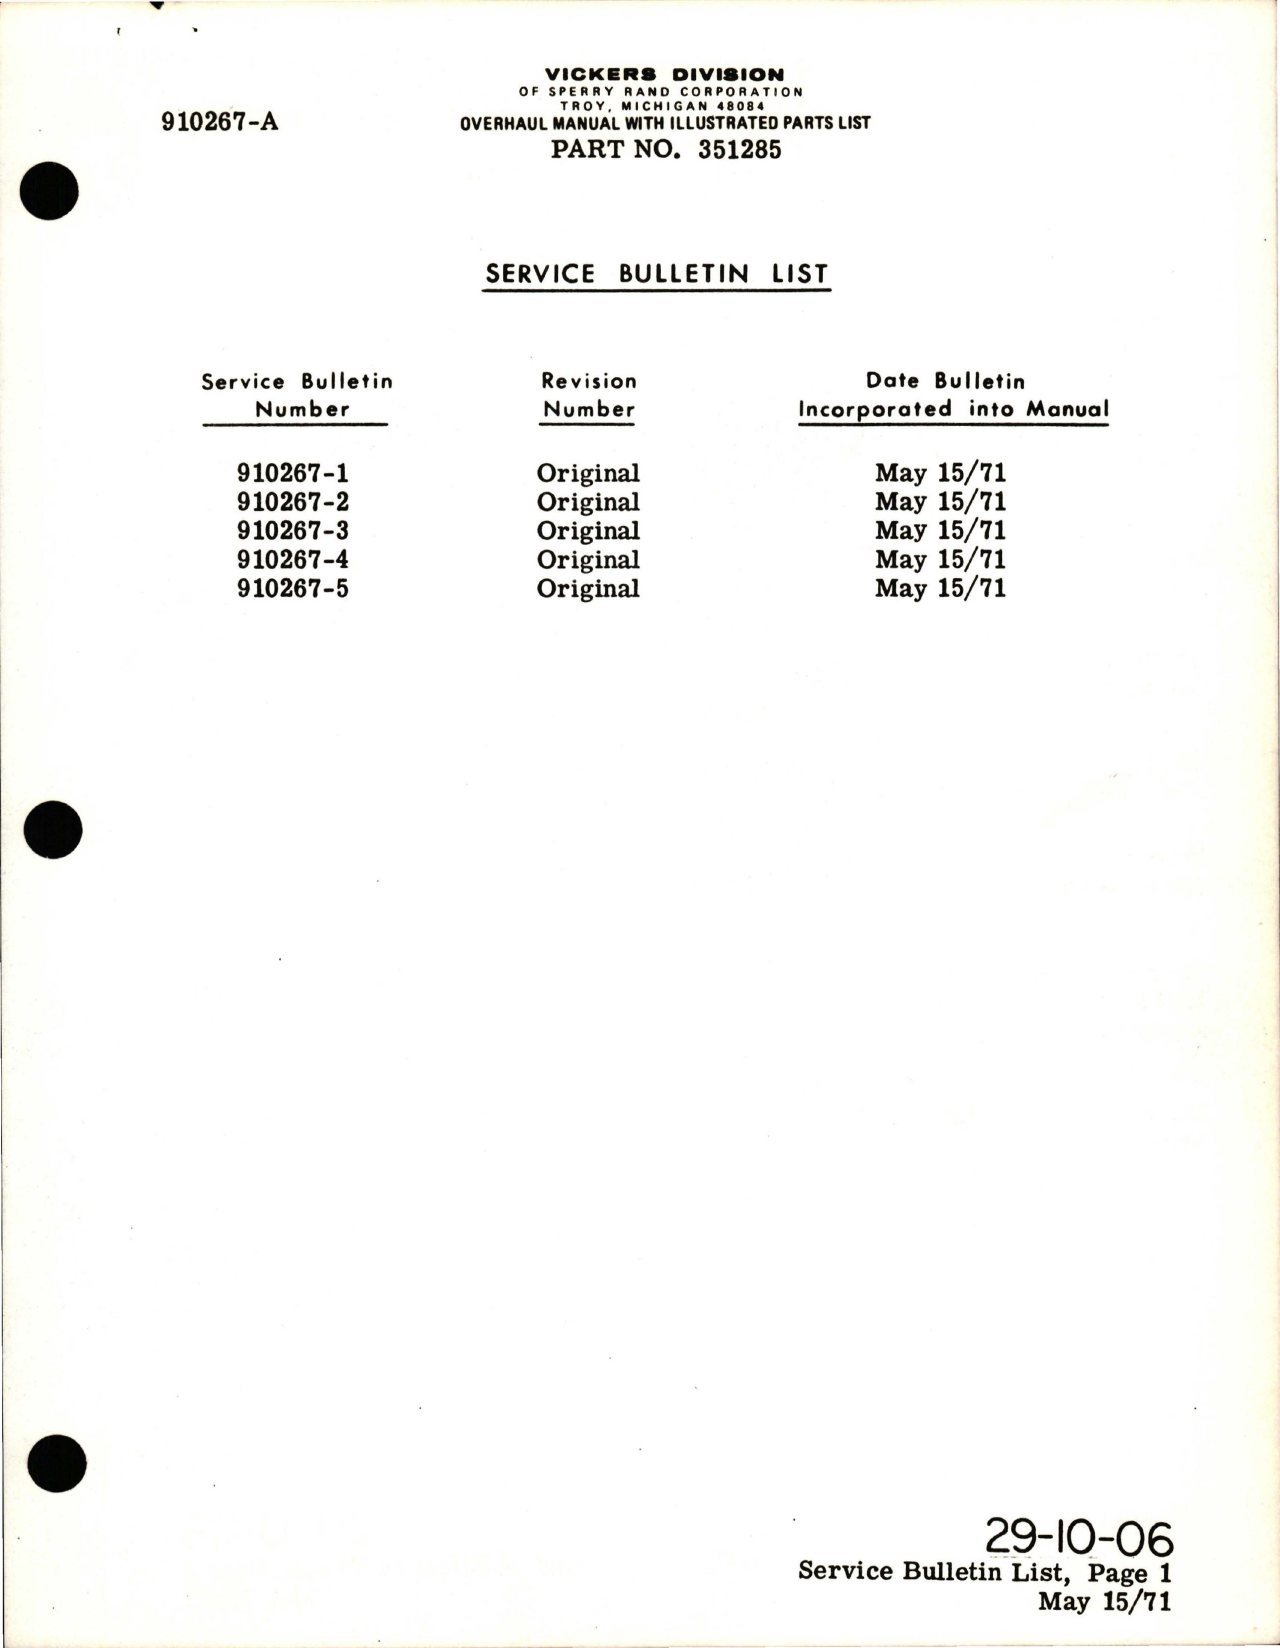 Sample page 9 from AirCorps Library document: Overhaul with Illustrated Parts List for Variable Displacement Hydraulic Pump - Part 351285 - Model PV3-022-8A